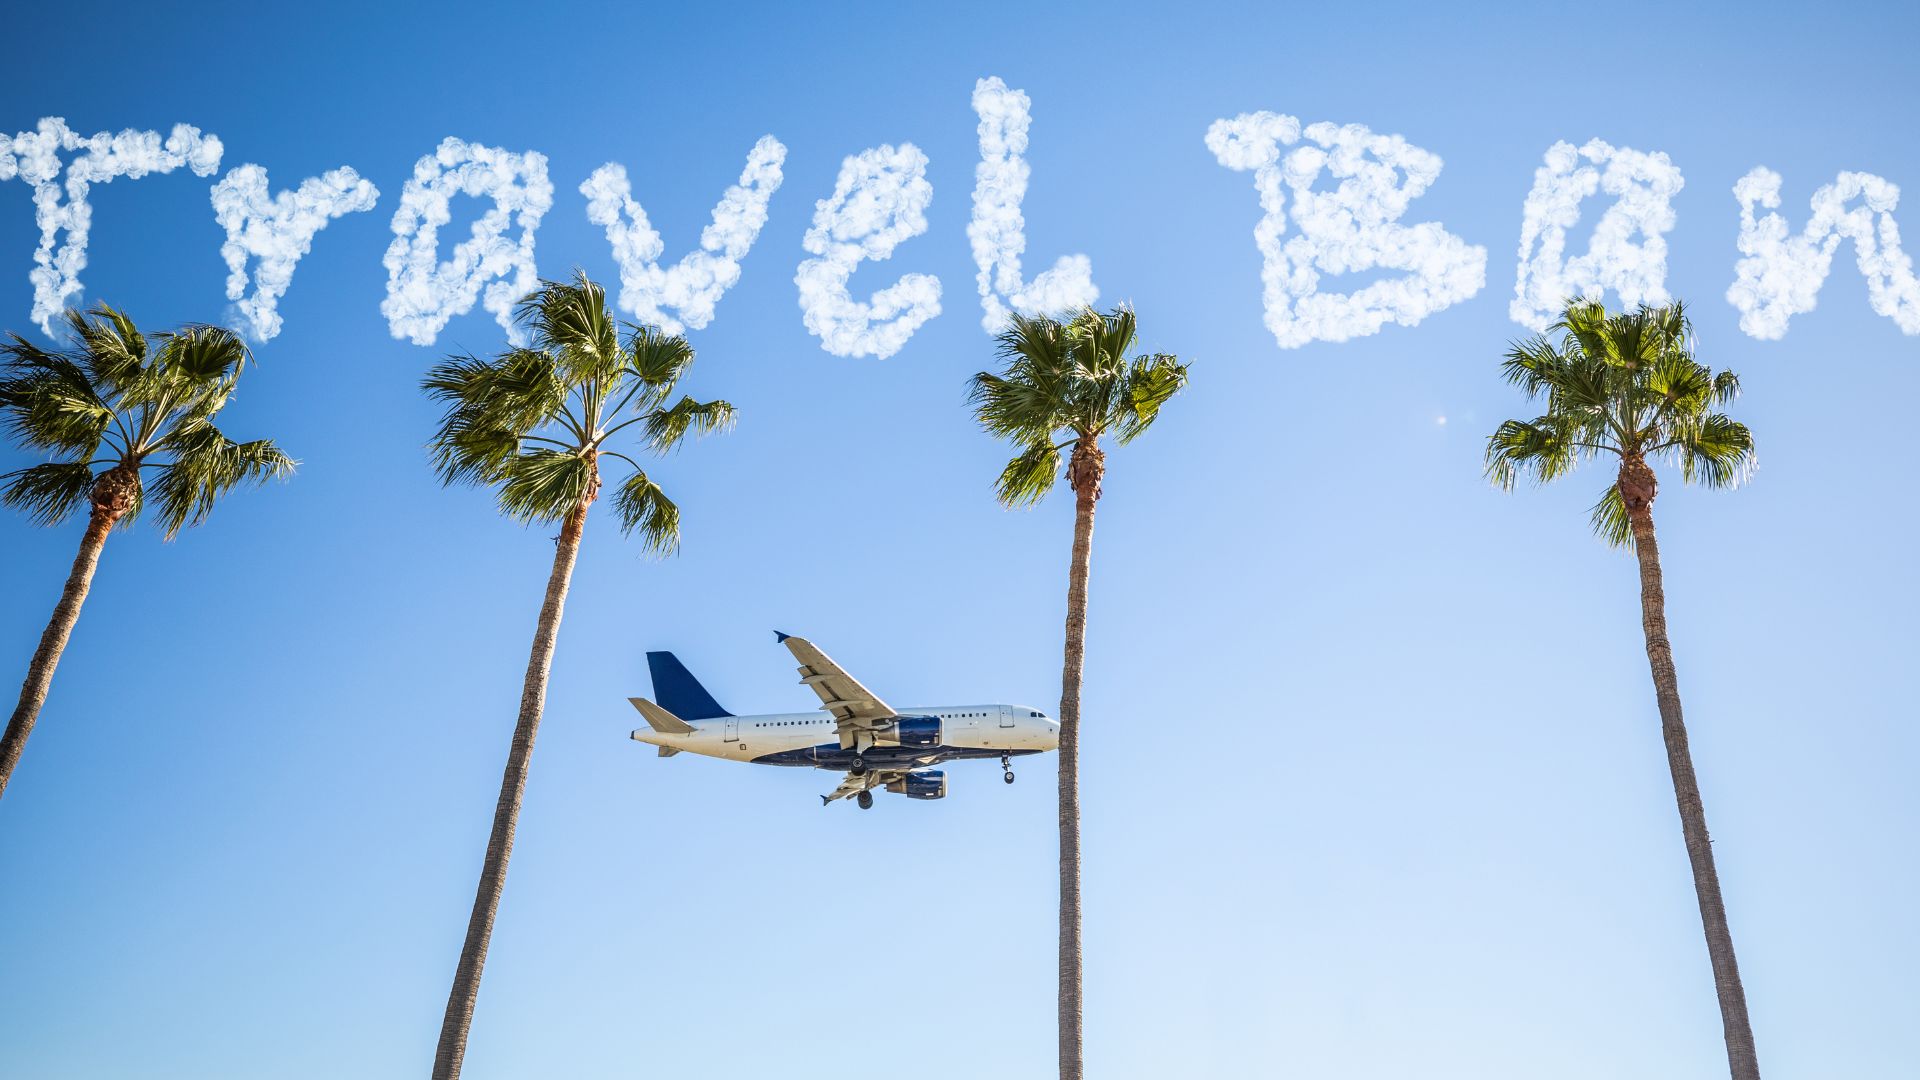 A commercial airplane flying low over four palm trees, with the words 'Travel Ban' written in the sky with cloud-like letters against a clear blue background.